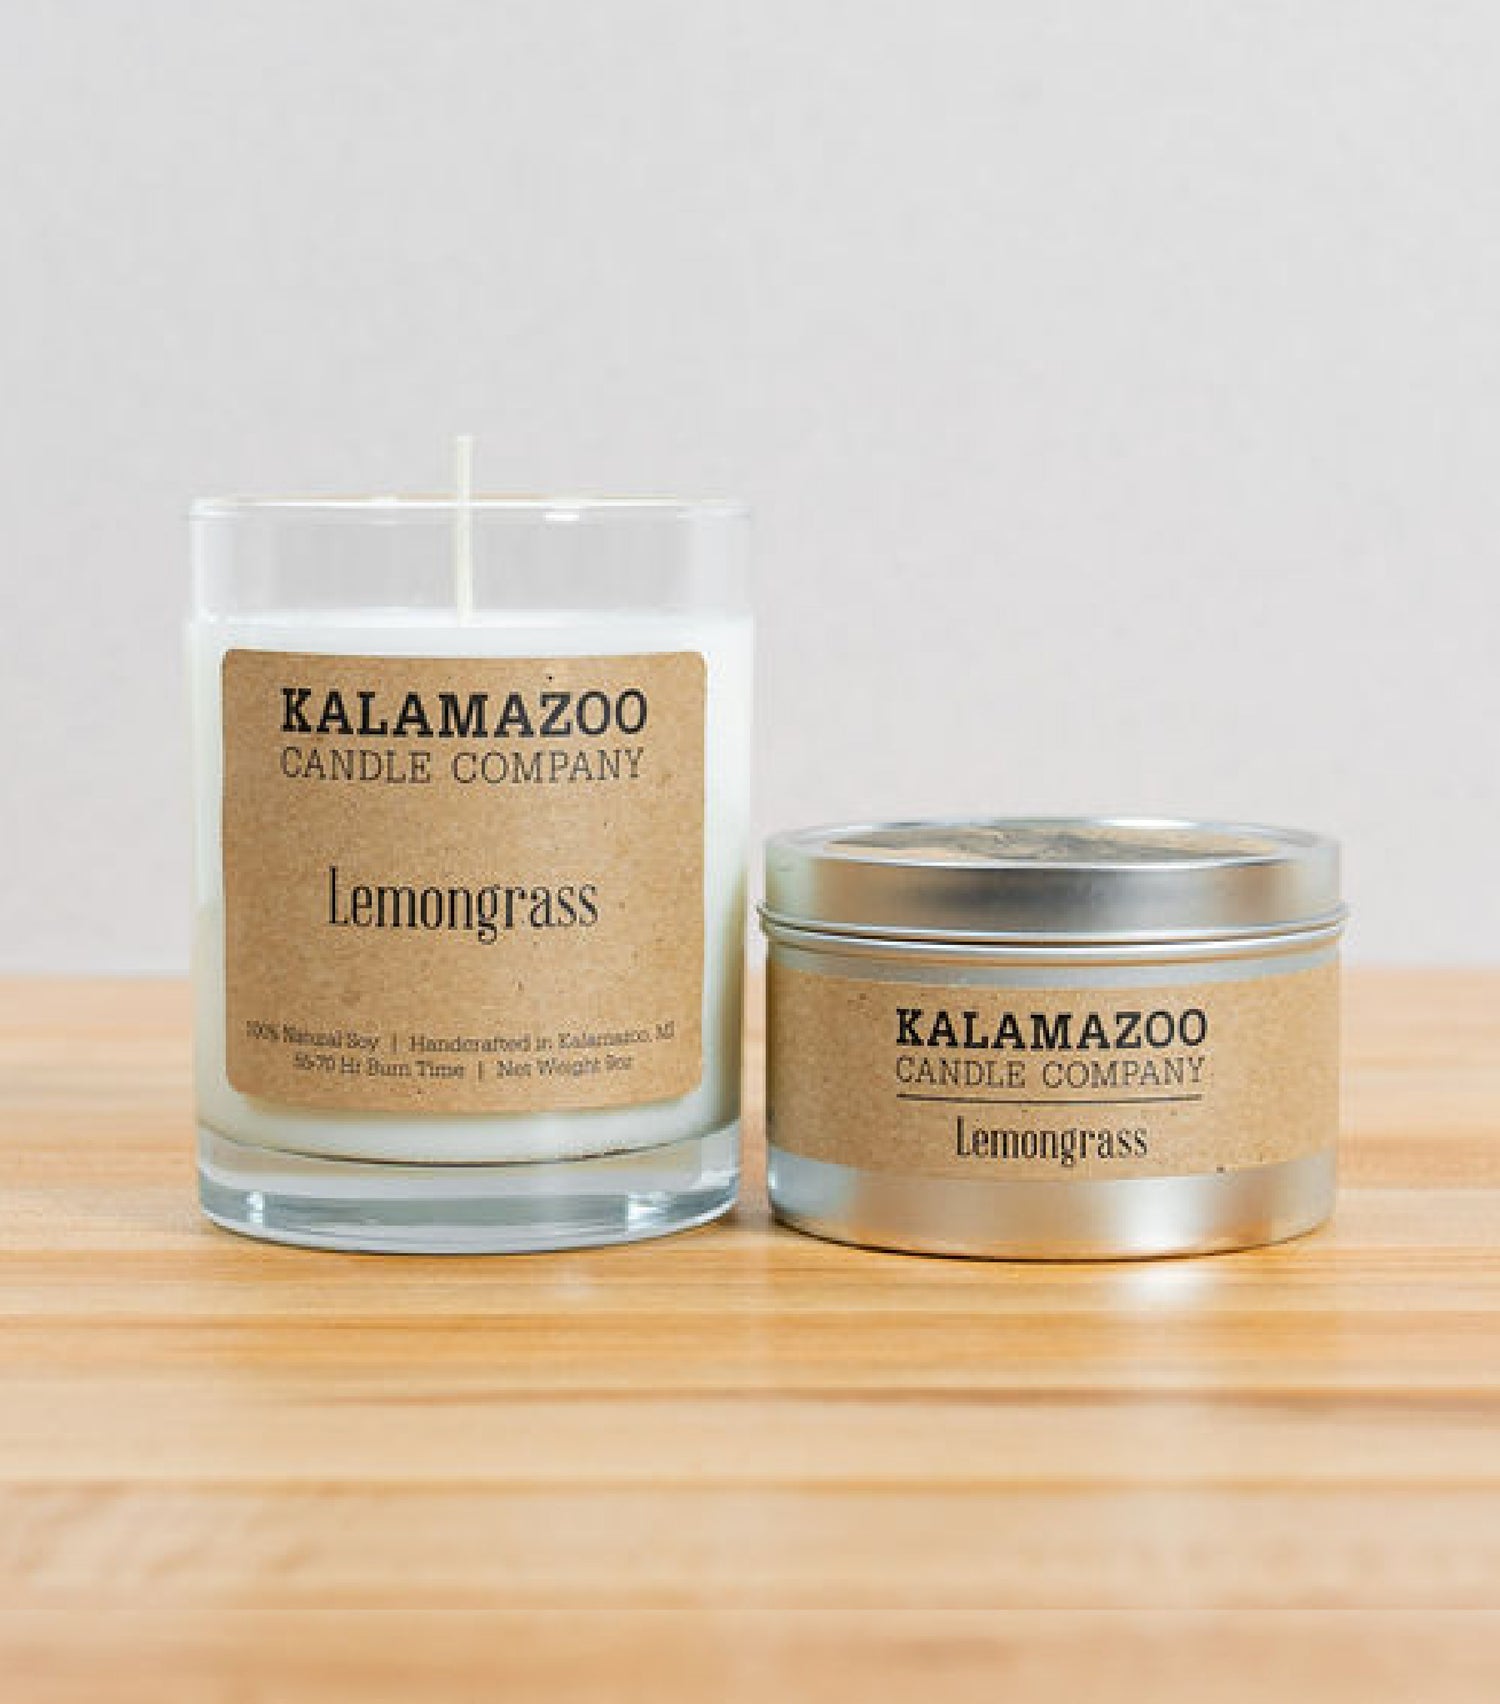 Lemongrass Candles Fruity and bright, this classic soy candle is an exotic mix of fragrant lemongrass, infused with sparkling mandarin orange and balanced by lush sweet greens. All Kalamazoo Candles are: 100% natural scented soy wax; produced using locally sourced ingredients.